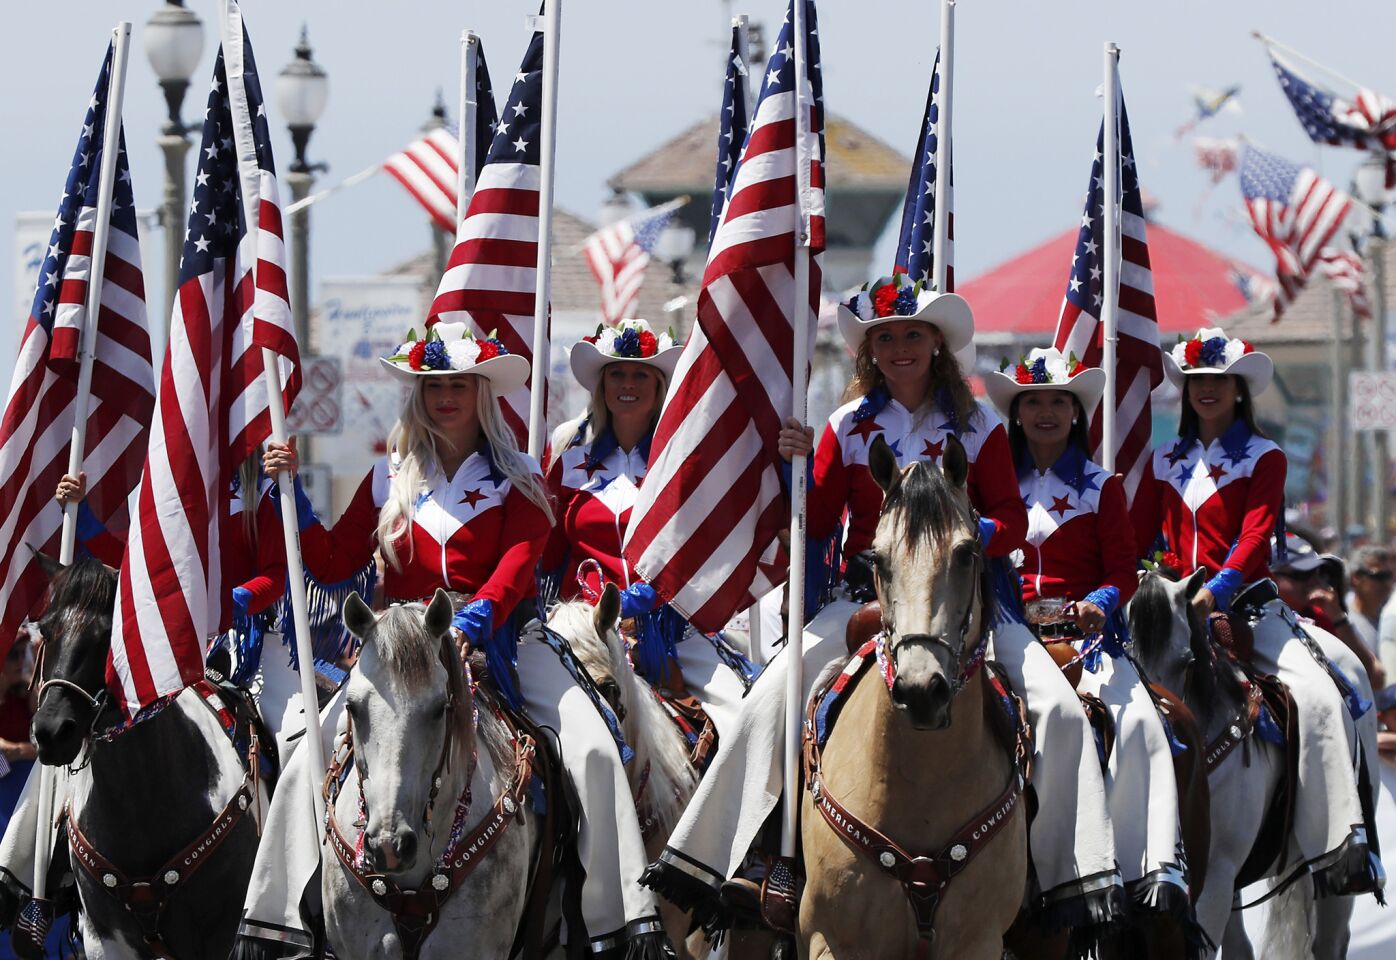 An equestrian team gets into the holiday spirit on Main Street during the annual Independence Day Parade in Huntington Beach.